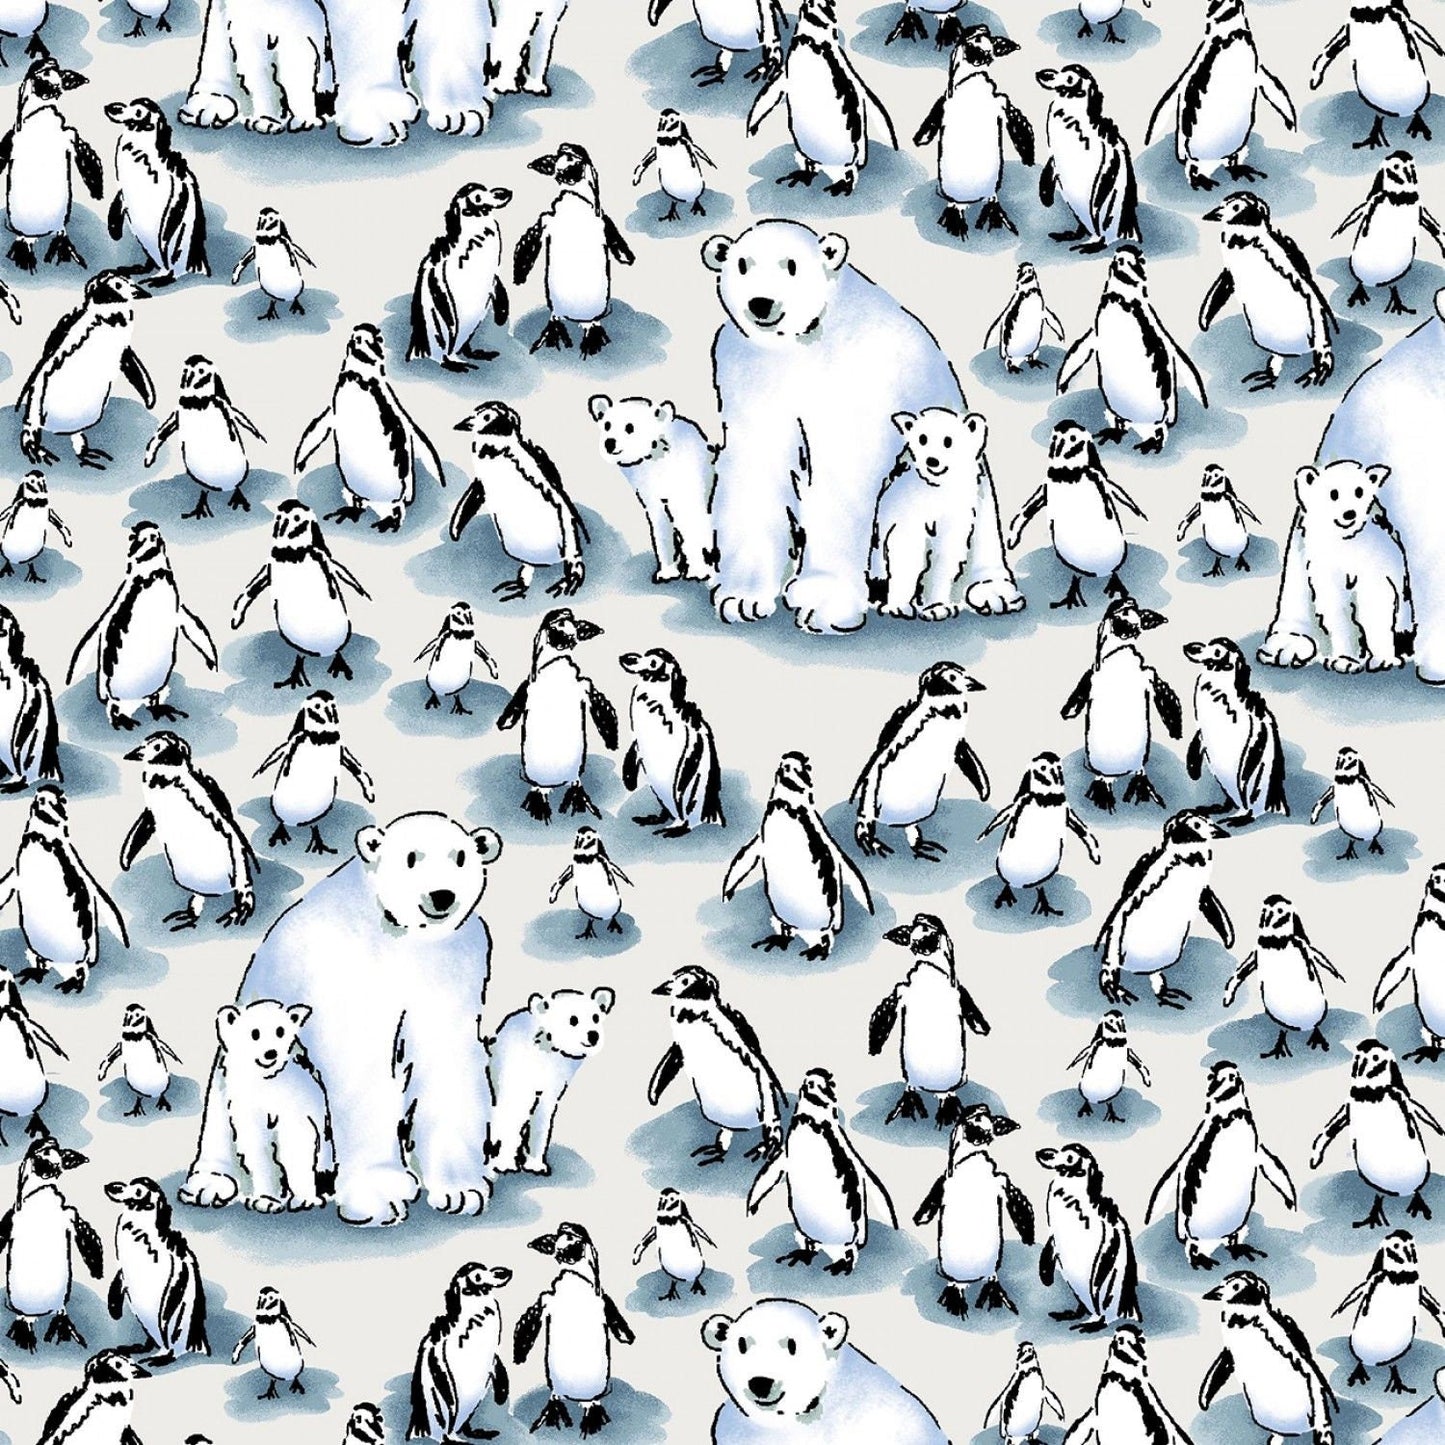 Family Fun Day Side by Side White Polar Bears & Penguins CX9040-WHIT  Cotton Woven Fabric